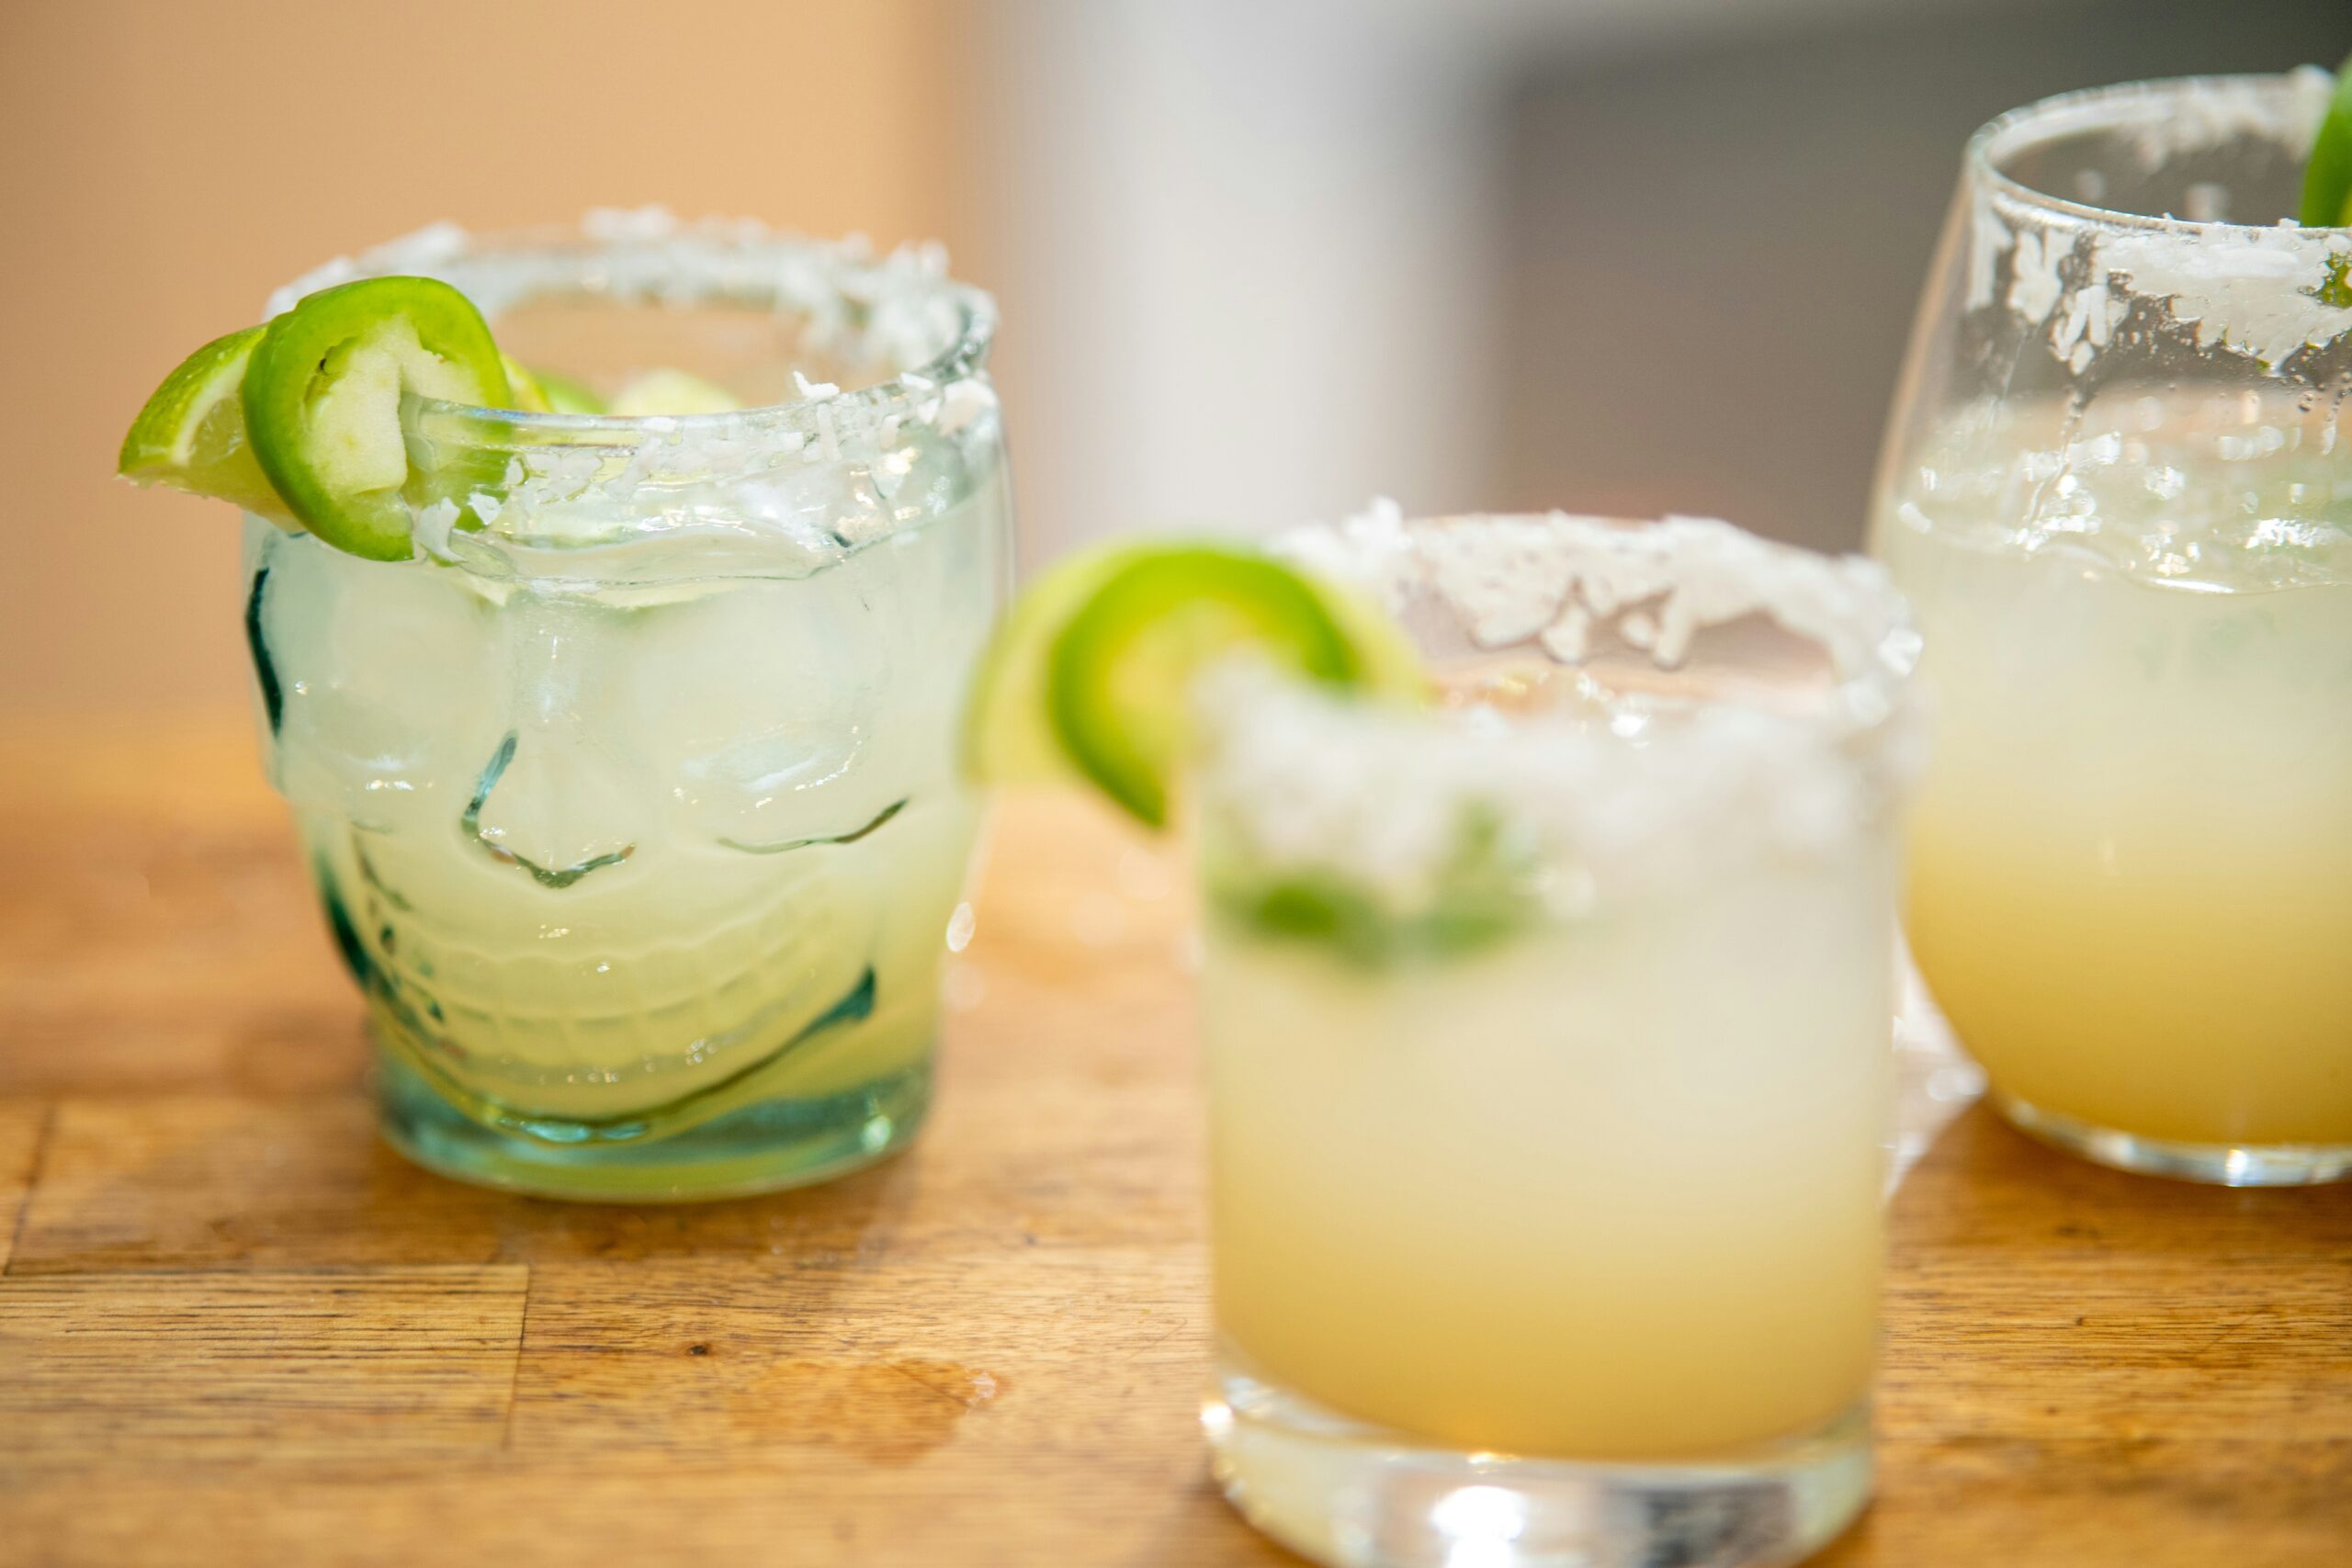 Spice things up with a spicy margarita. It's one of the best tequila cocktails for those who like the heat. Pictured: Margaritas